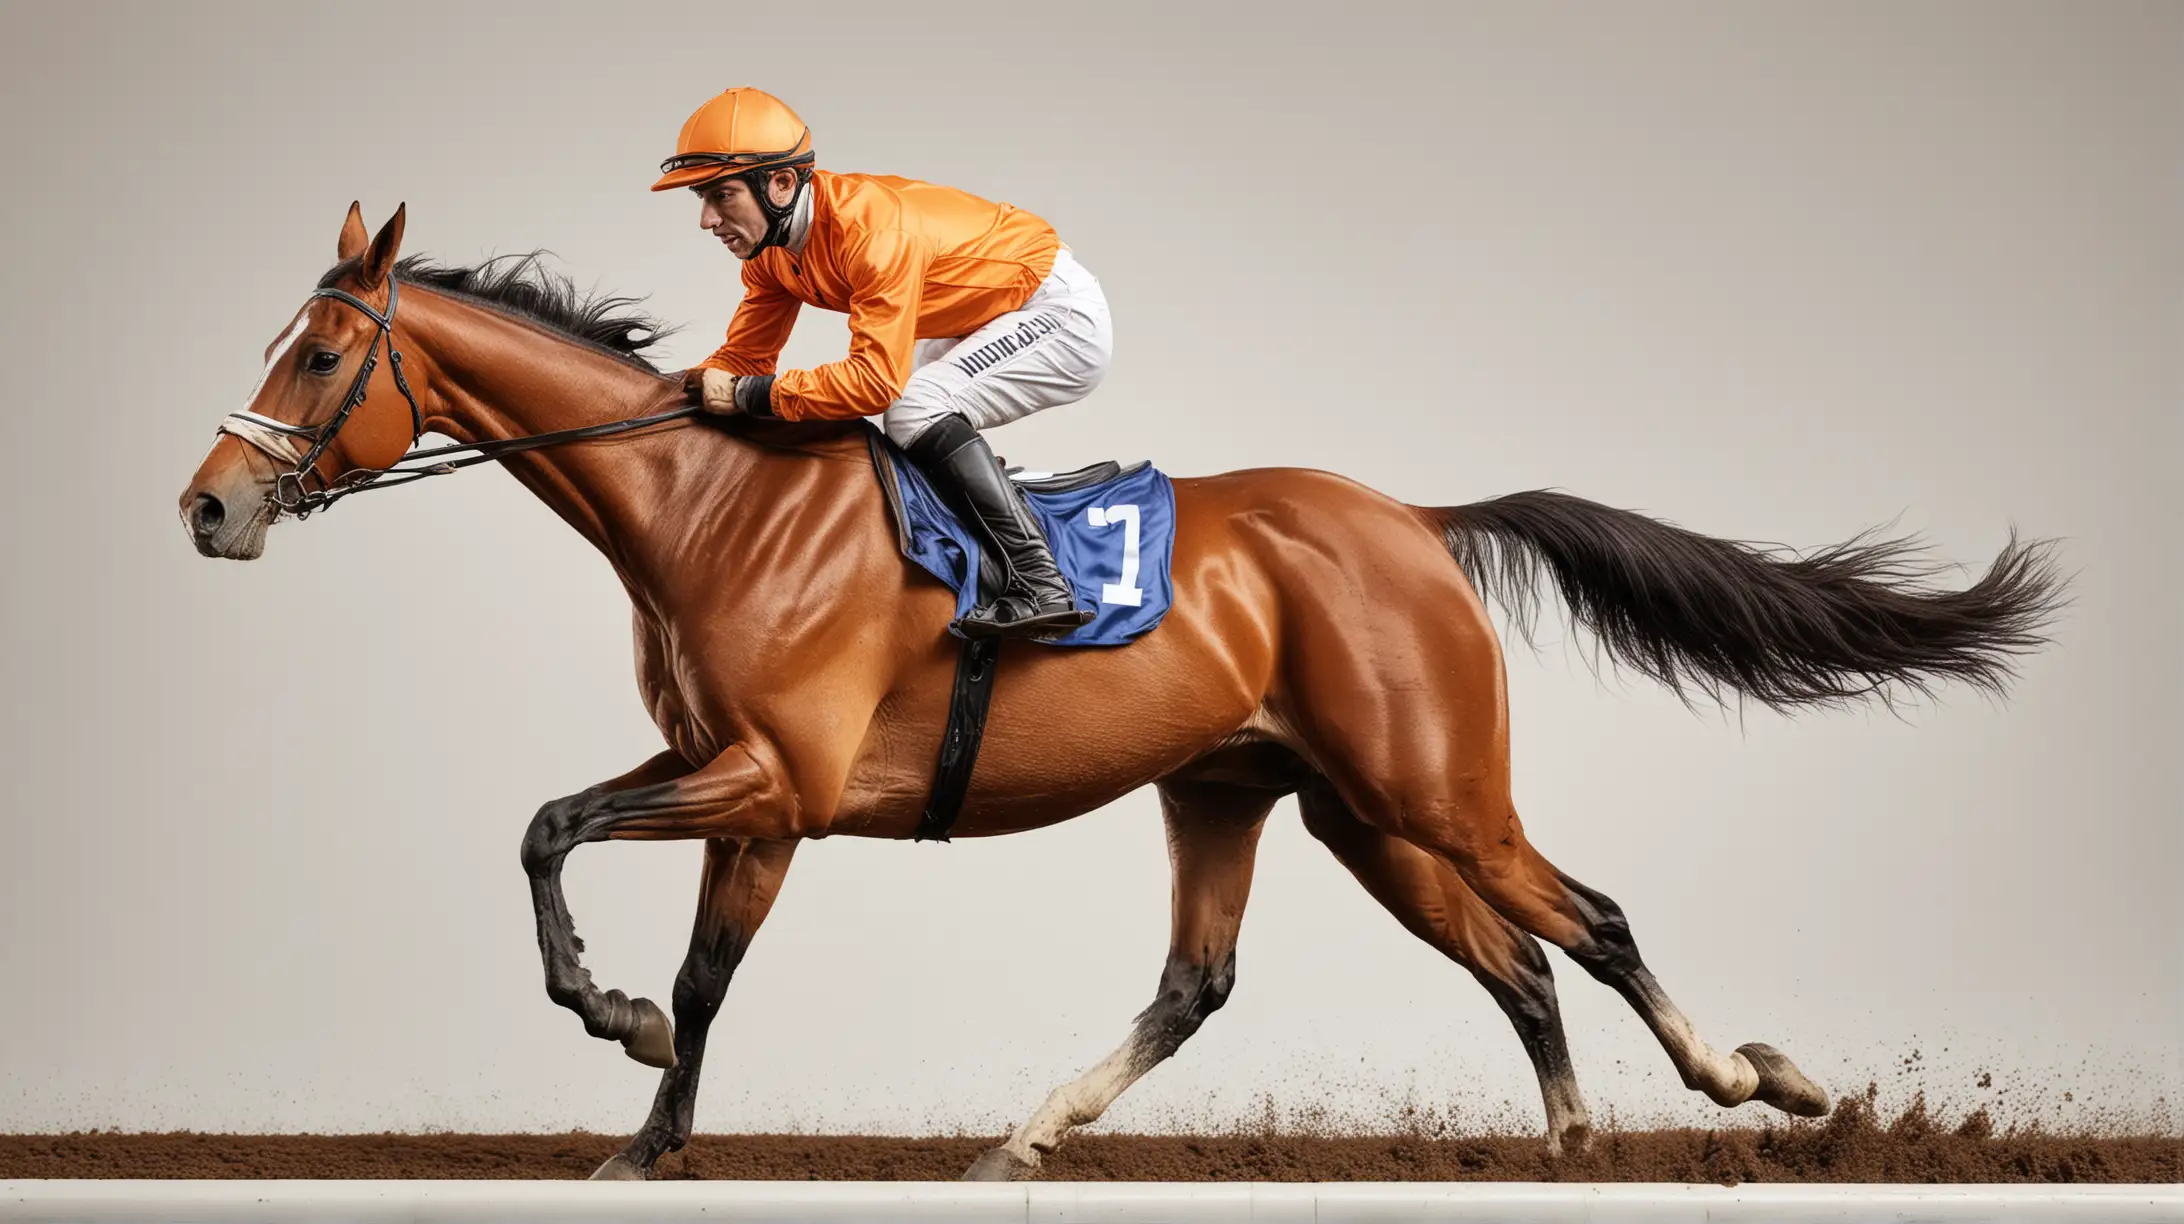 Racehorse and Jockey in Orange Jersey Racing Isolated on White Background